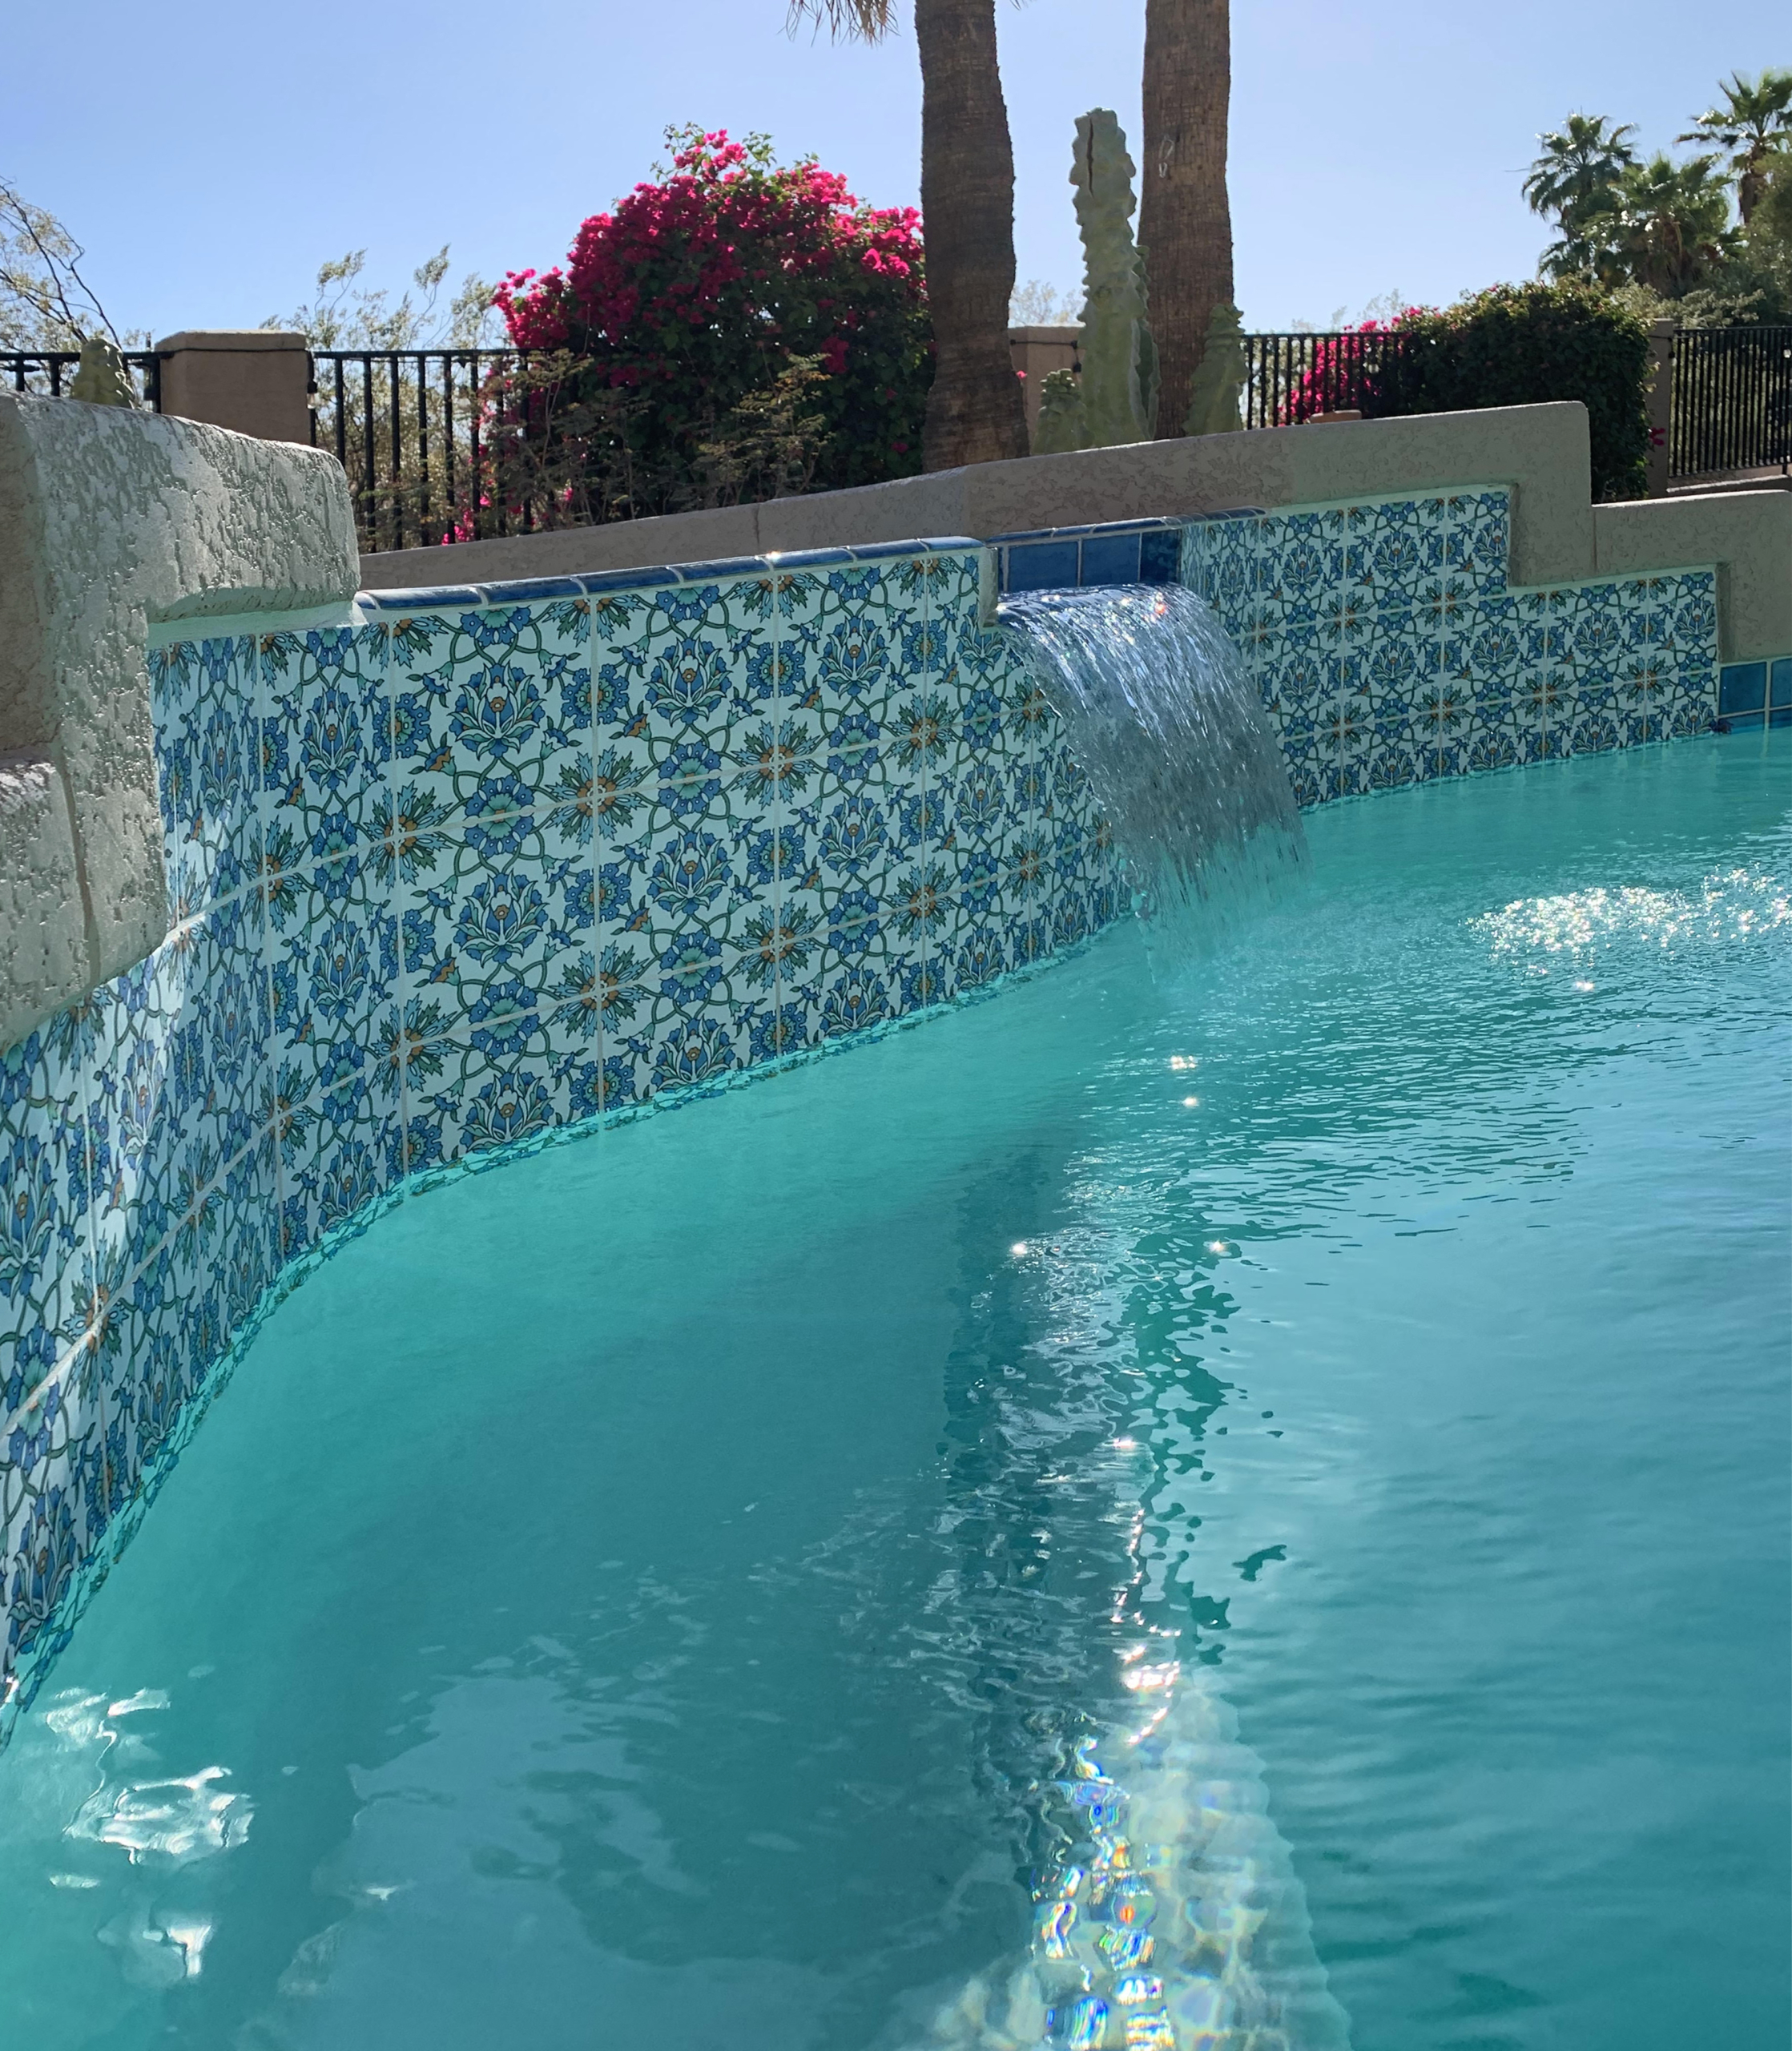 Waterline pool tiles for a stunning swimming pool design project